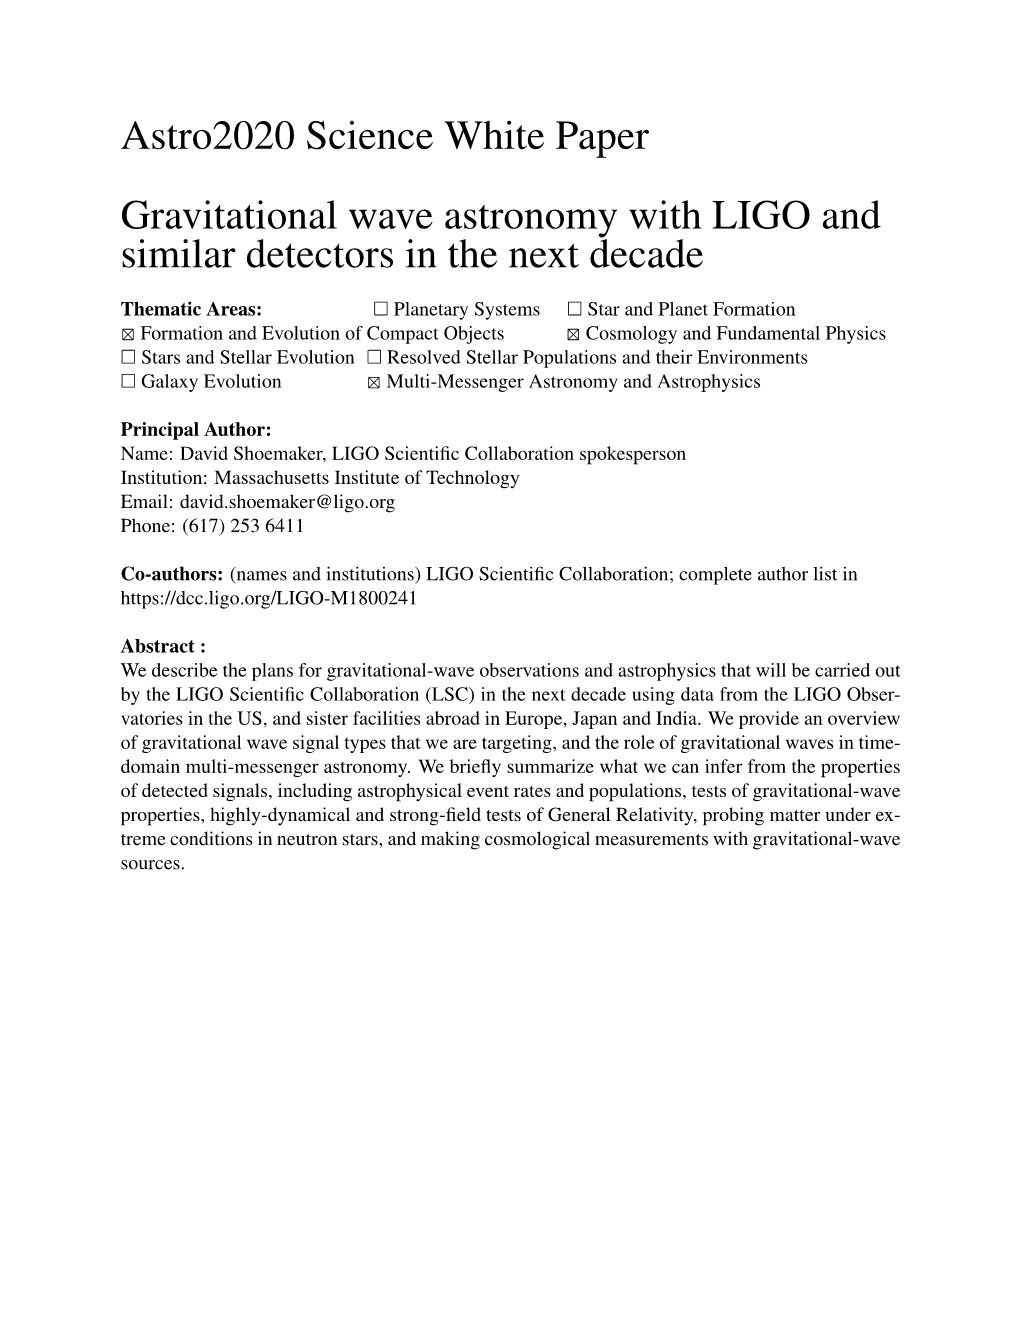 Gravitational Wave Astronomy with LIGO and Similar Detectors in the Next Decade